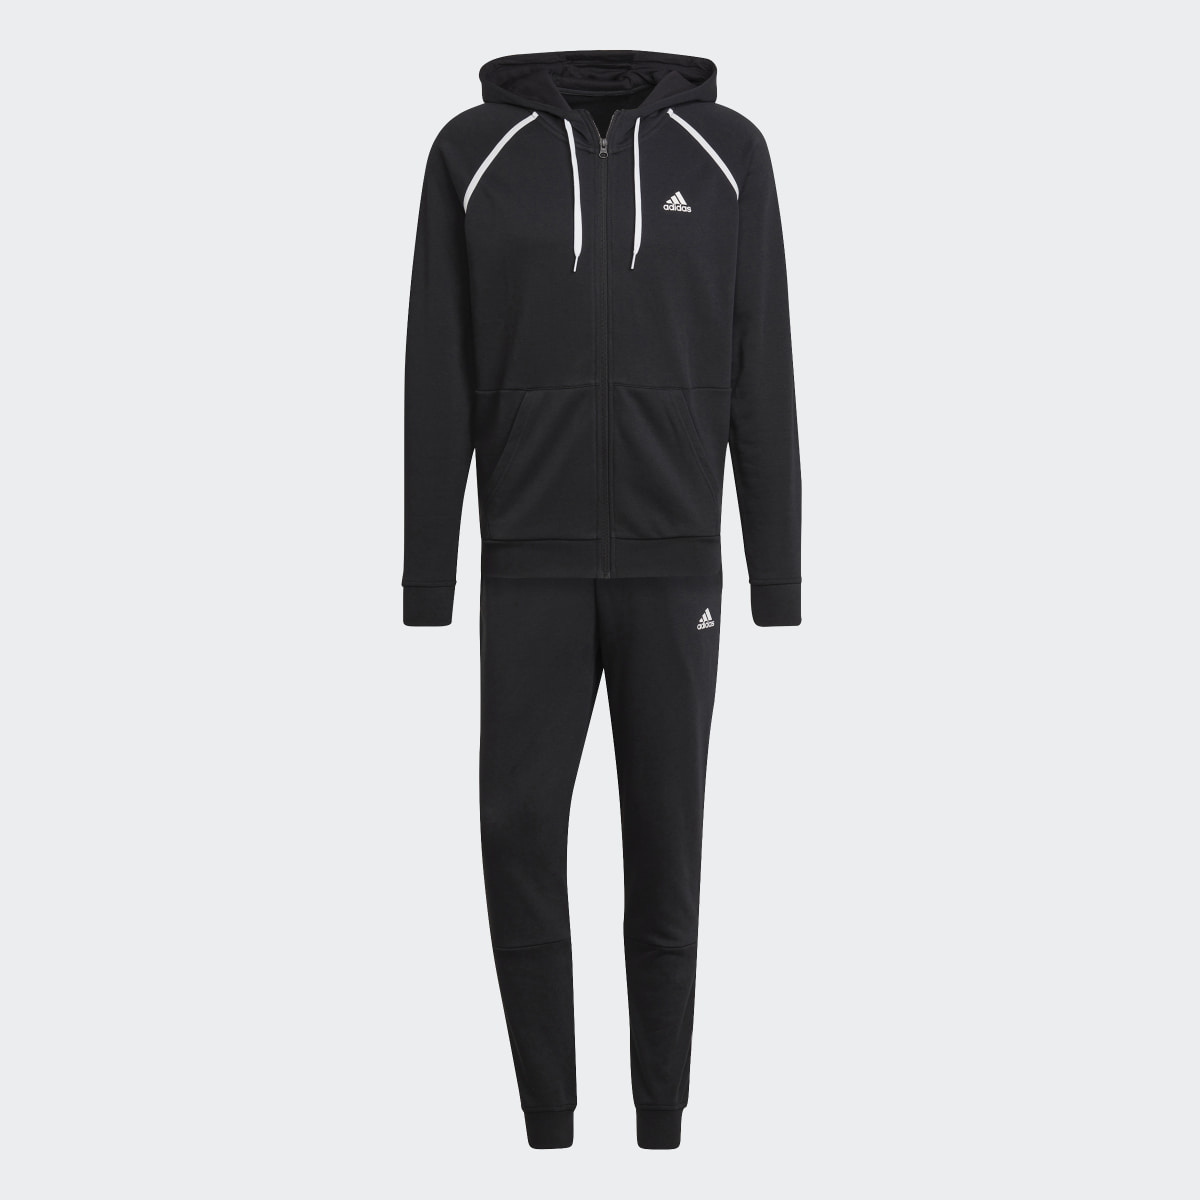 Adidas Cotton Piping Track Suit. 5